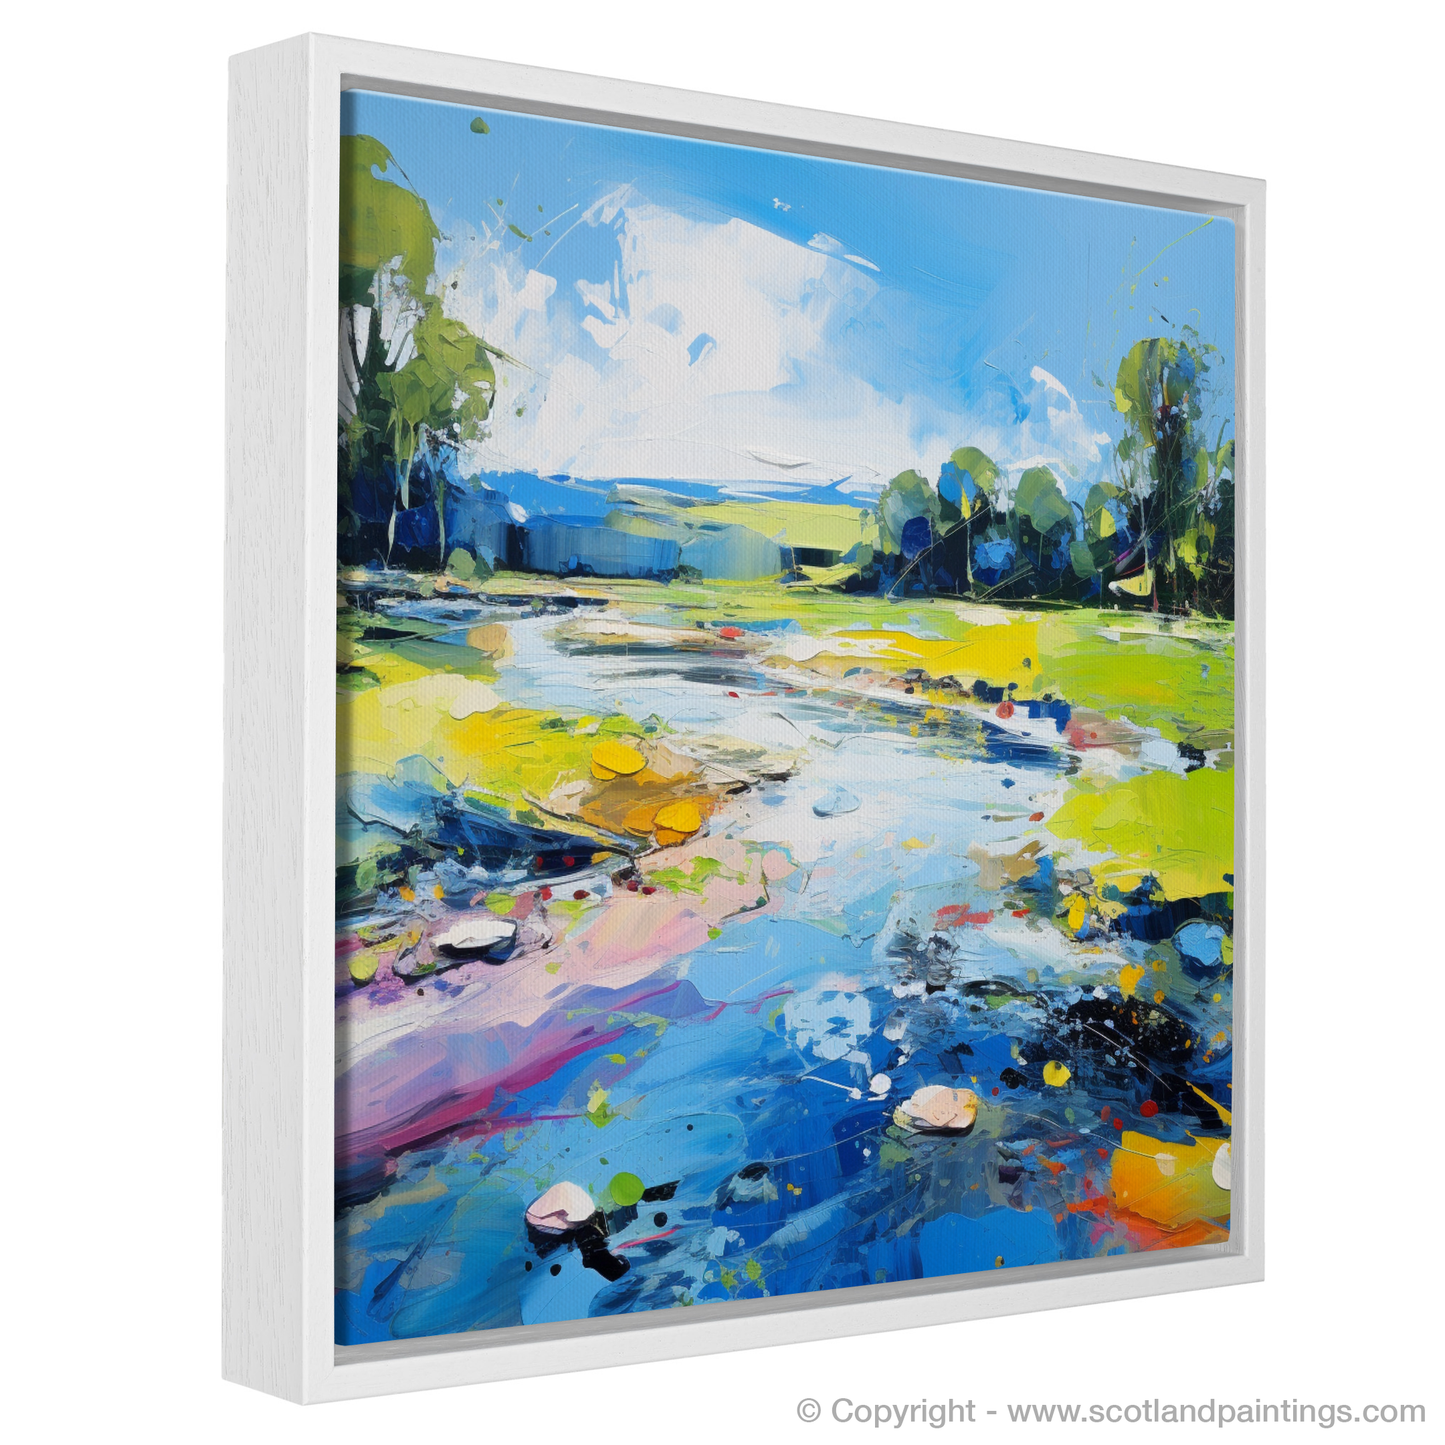 Painting and Art Print of River Dee, Aberdeenshire in summer entitled "Summer Rhapsody on the River Dee".